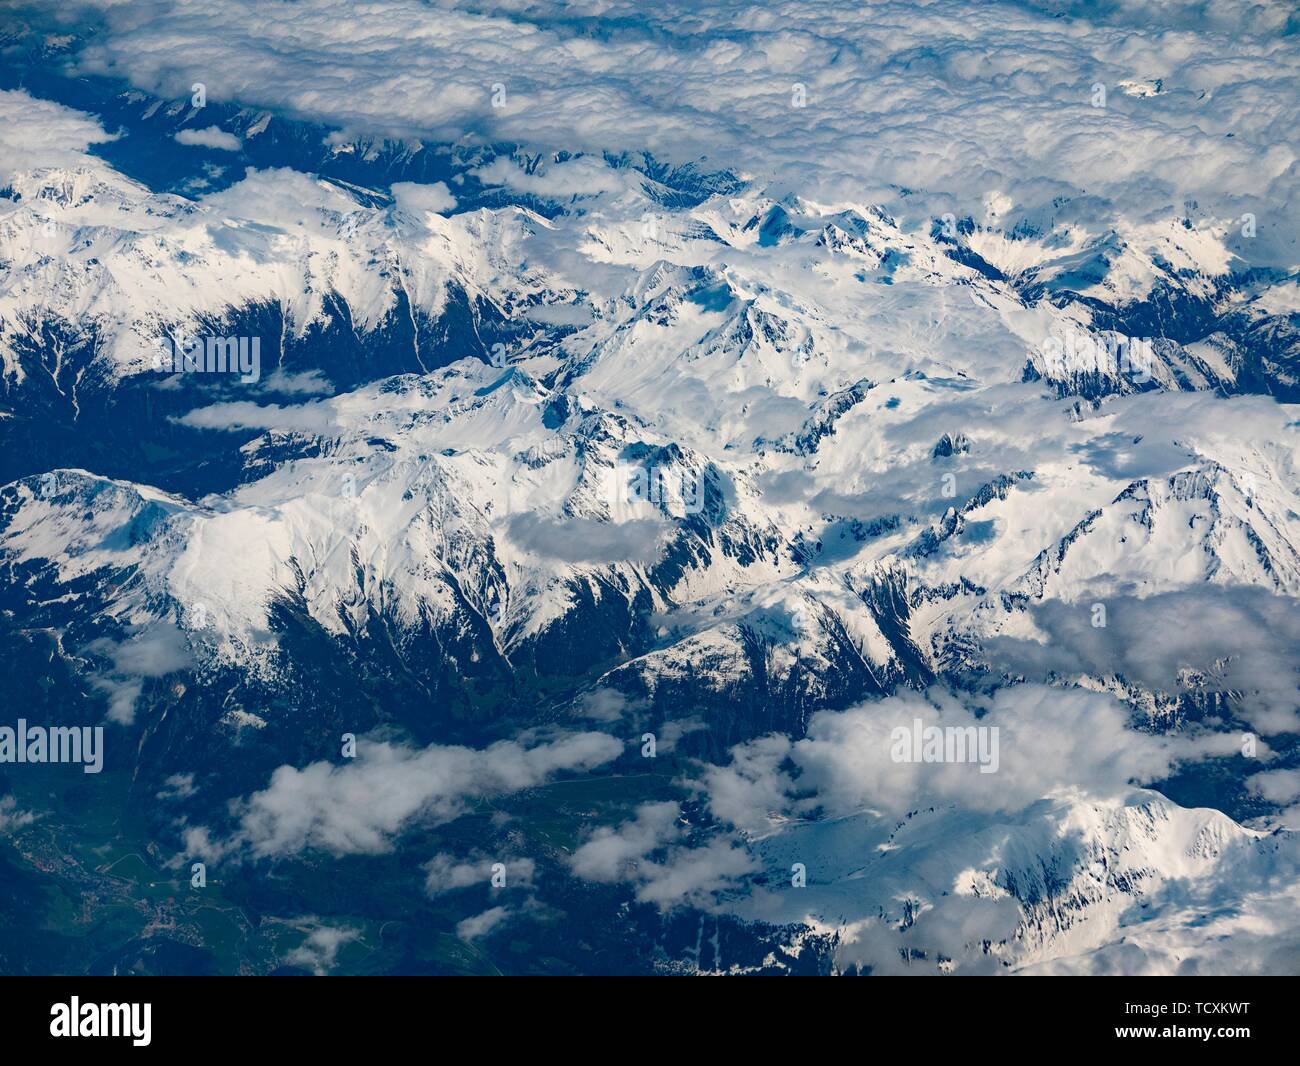 Aerial view of the Swiss Alps. Stock Photo